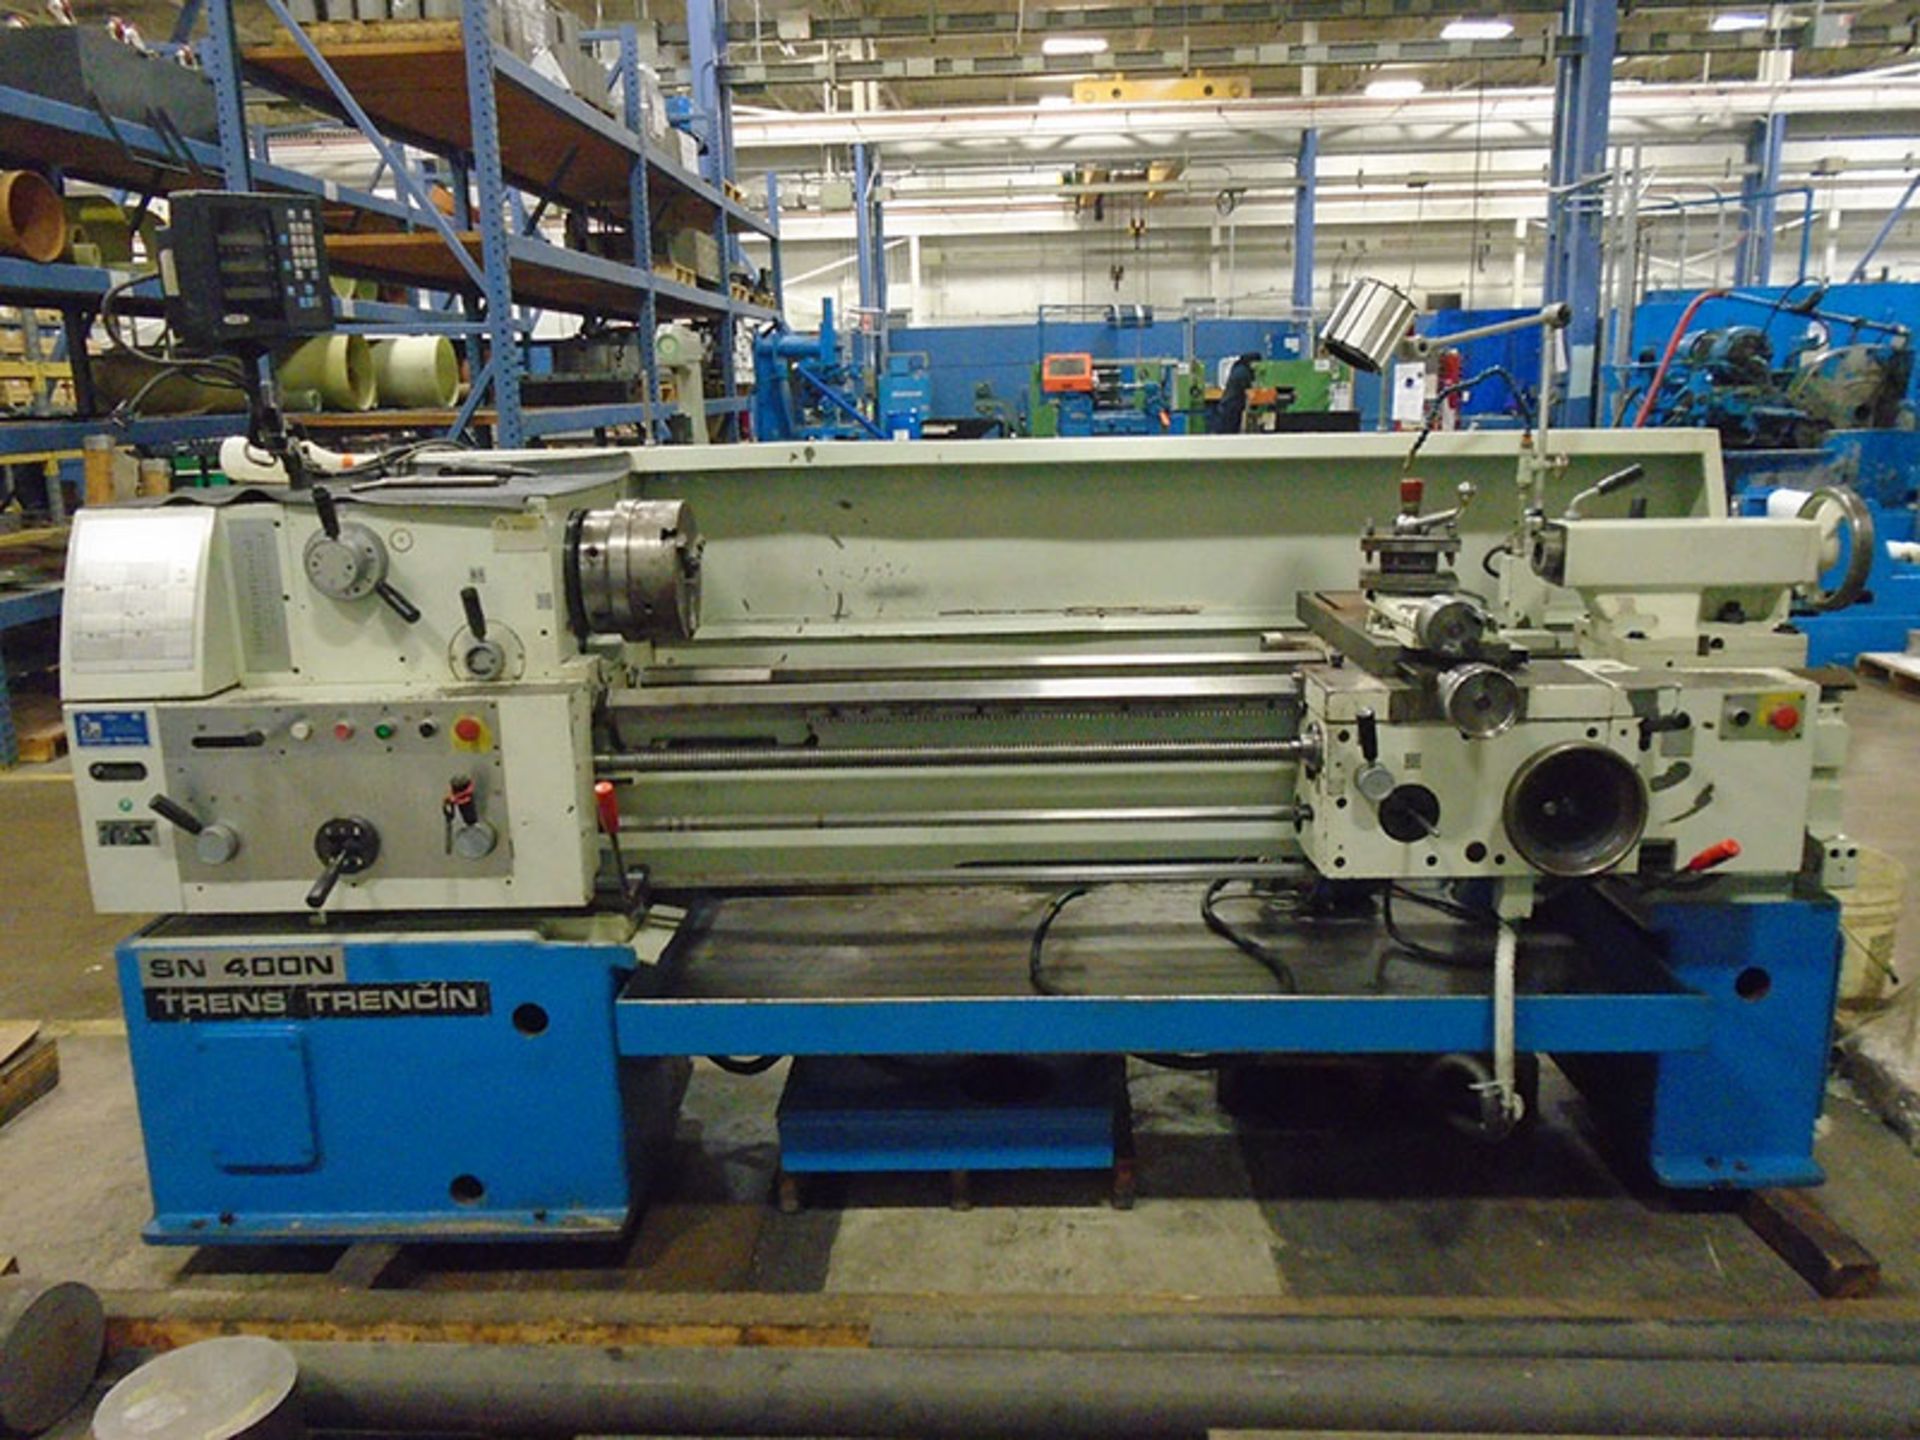 ENGINE LATHE TRENS TRENCHIN (TOS), MODEL SN400N, YEAR 2002,SN 68004015010057,  LOCATION WI